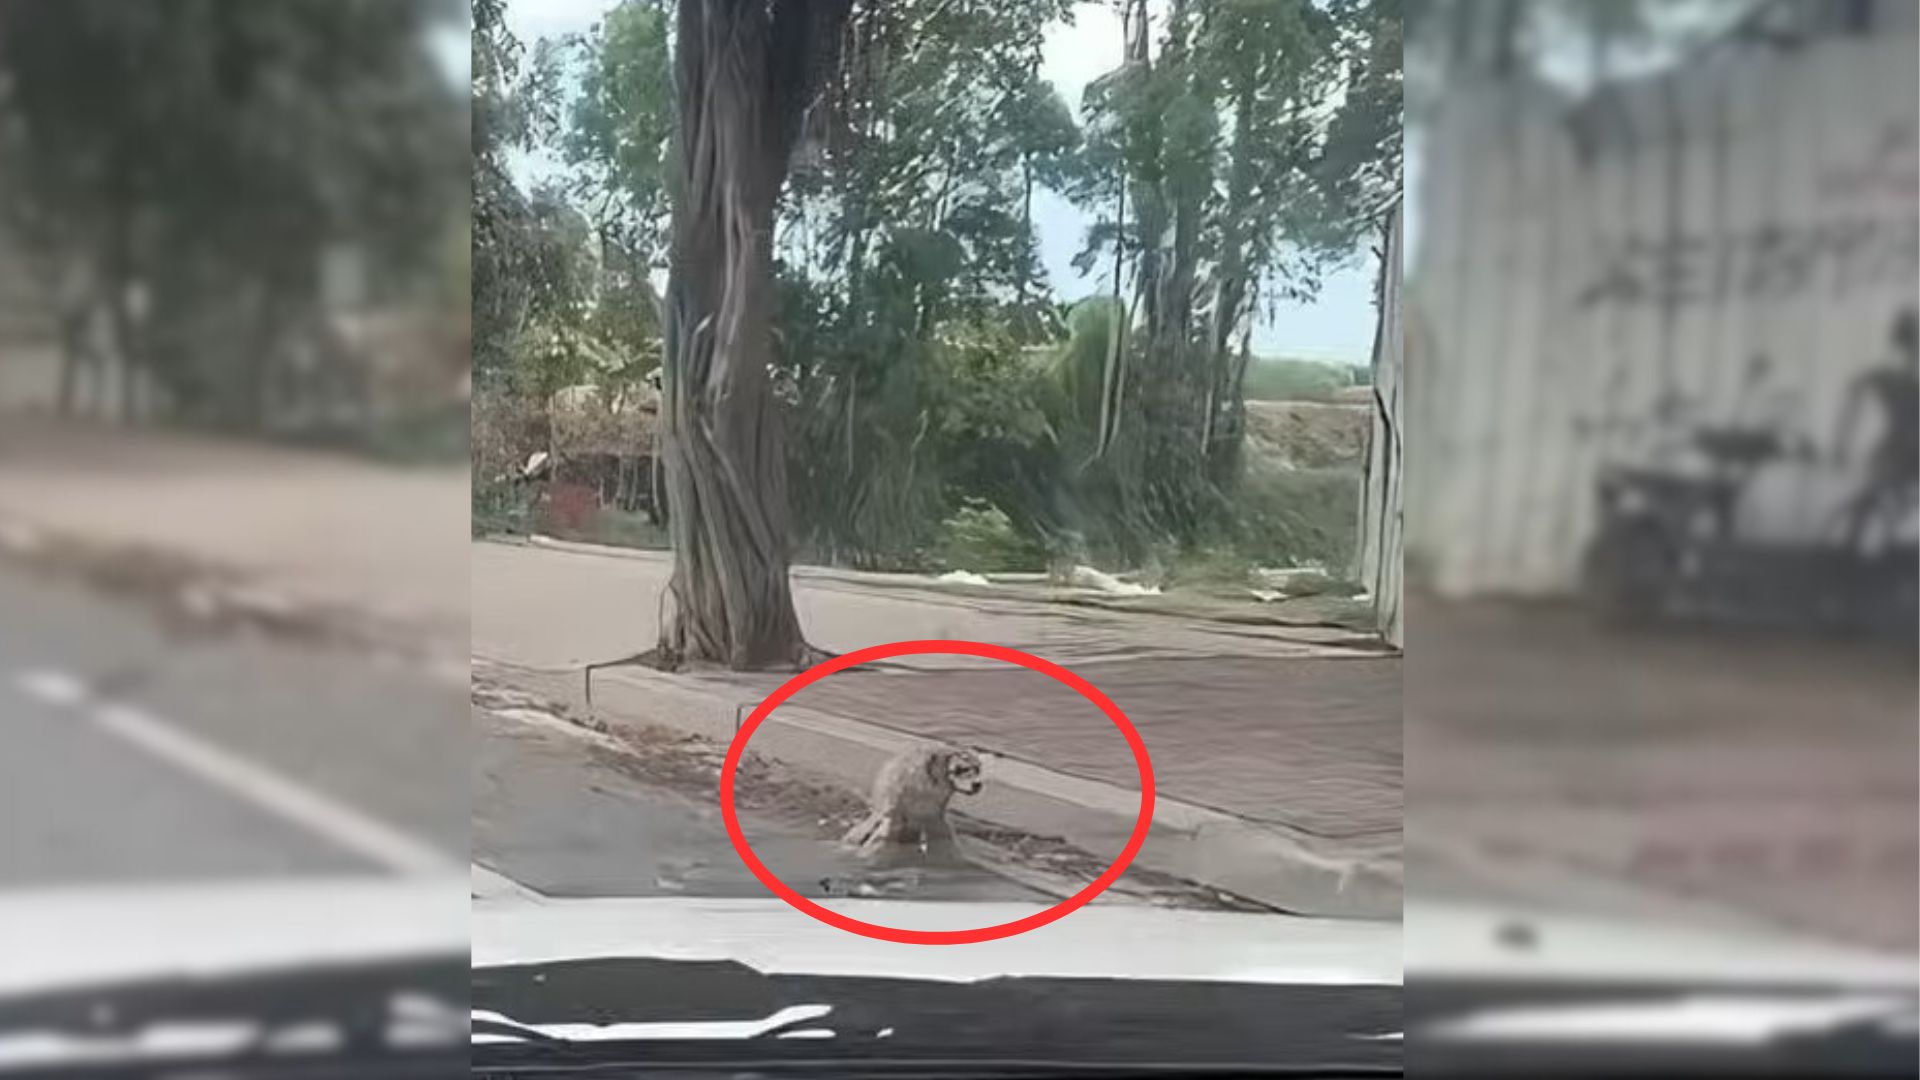 Man Noticed A Disabled Stray Dog Standing In The Middle Of The Road And Decided To Help